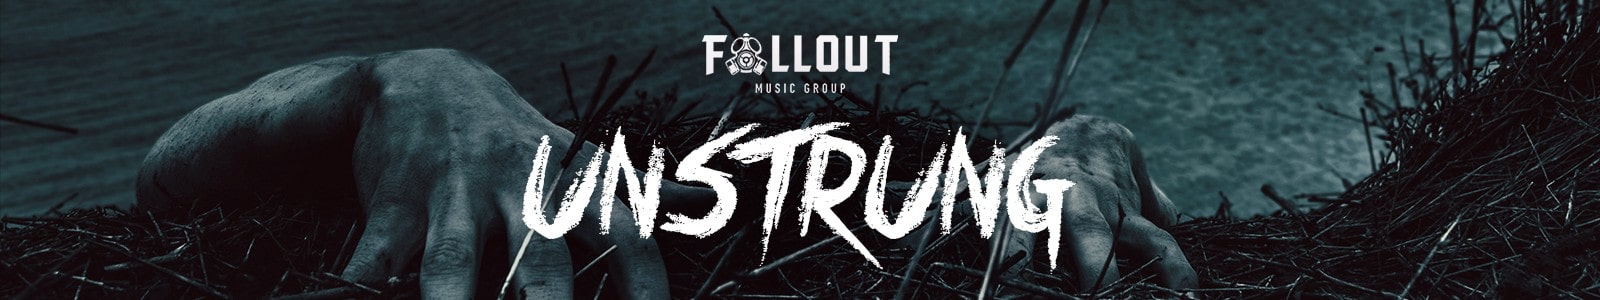 Fallout Music Group UNSTRUNG